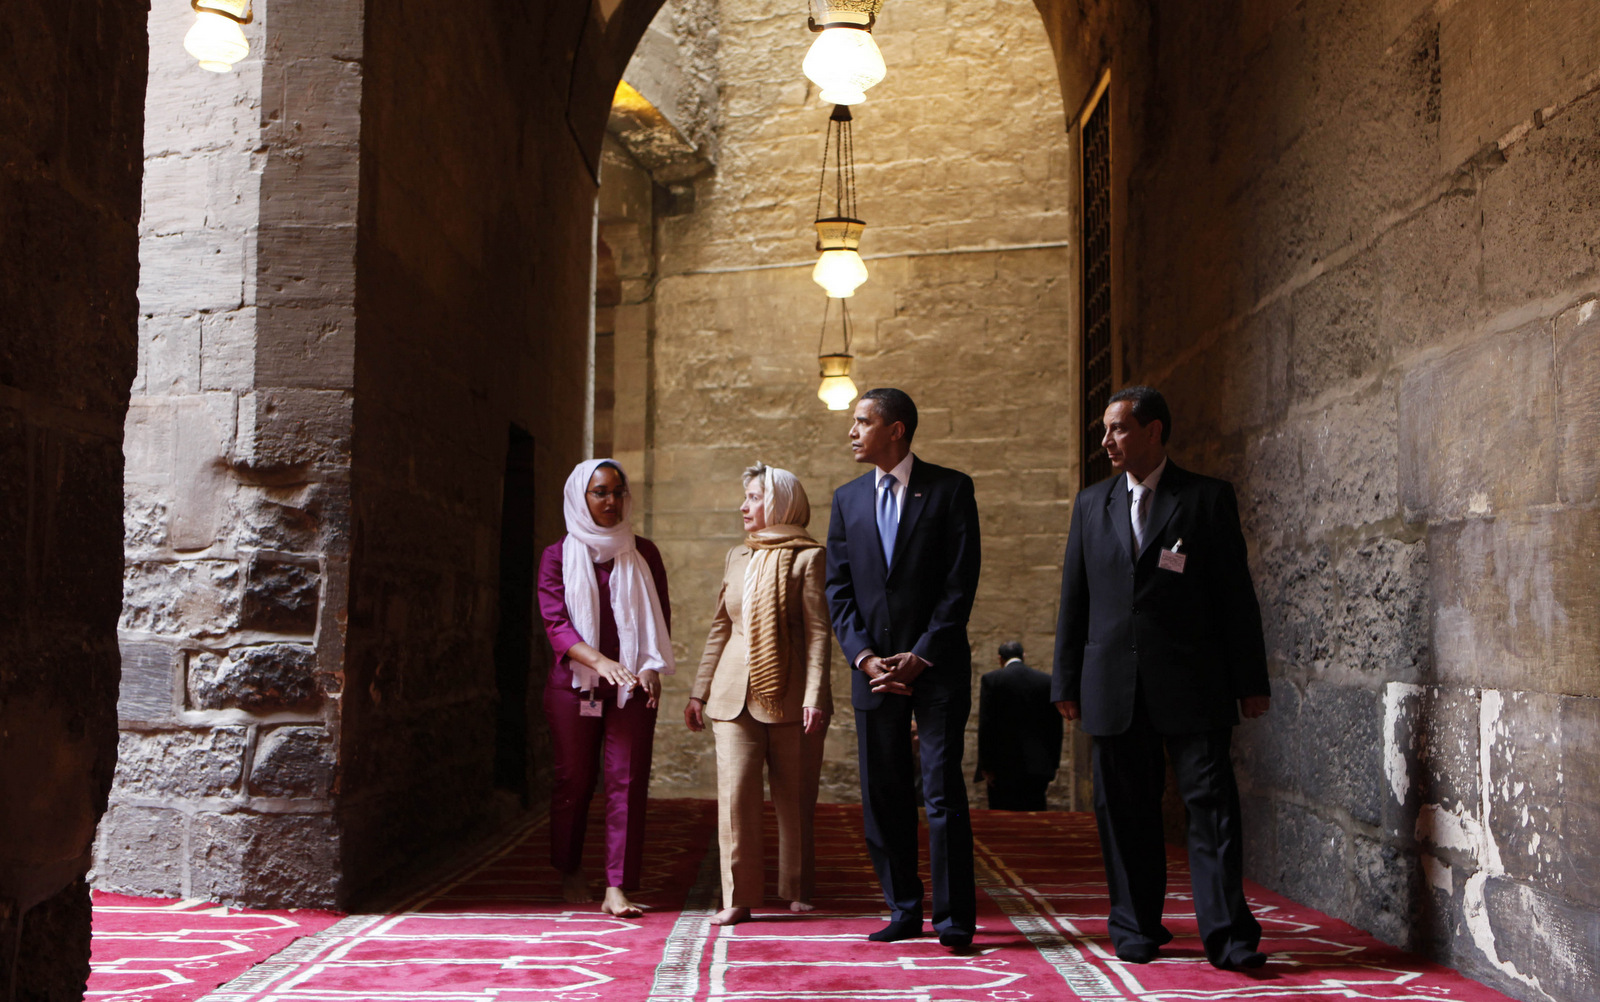 In this Thursday, June 4, 2009 file photo, U.S. President Barack Obama, 2nd right, tours the Sultan Hassan Mosque in Cairo, Egypt, with U.S. Secretary of State Hillary Rodham Clinton, 2nd left,  Iman Abdel Fateh at left and Dr. Zahi Hawass, right. Obama's first visit to a U.S. mosque comes as Muslim-Americans say they're confronting increasing levels of bias in speech and deeds. Obama is scheduled to visit the Islamic Society of Baltimore on Wednesday, Feb. 3, 2016. (AP Photo/Gerald Herbert)